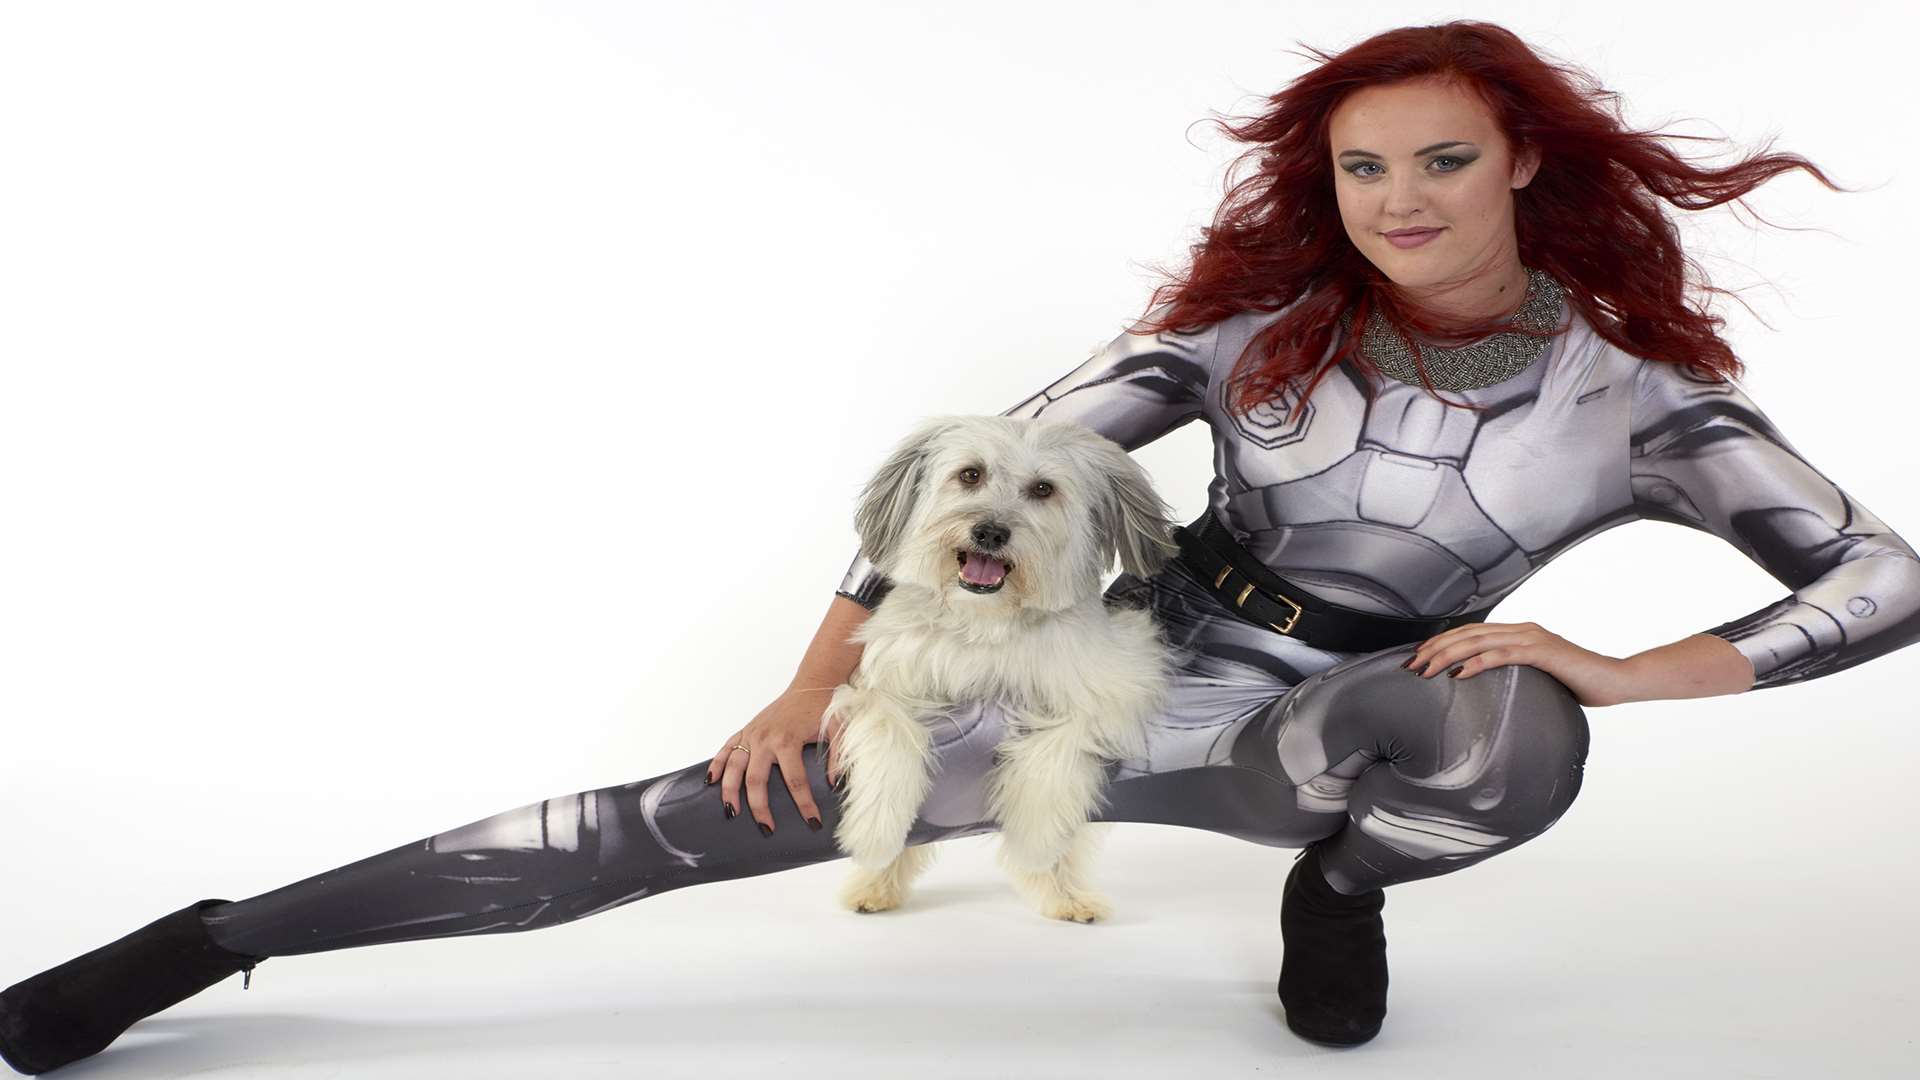 Ashleigh and Pudsey will star in Mission Impudseyble on Sunday, May 30